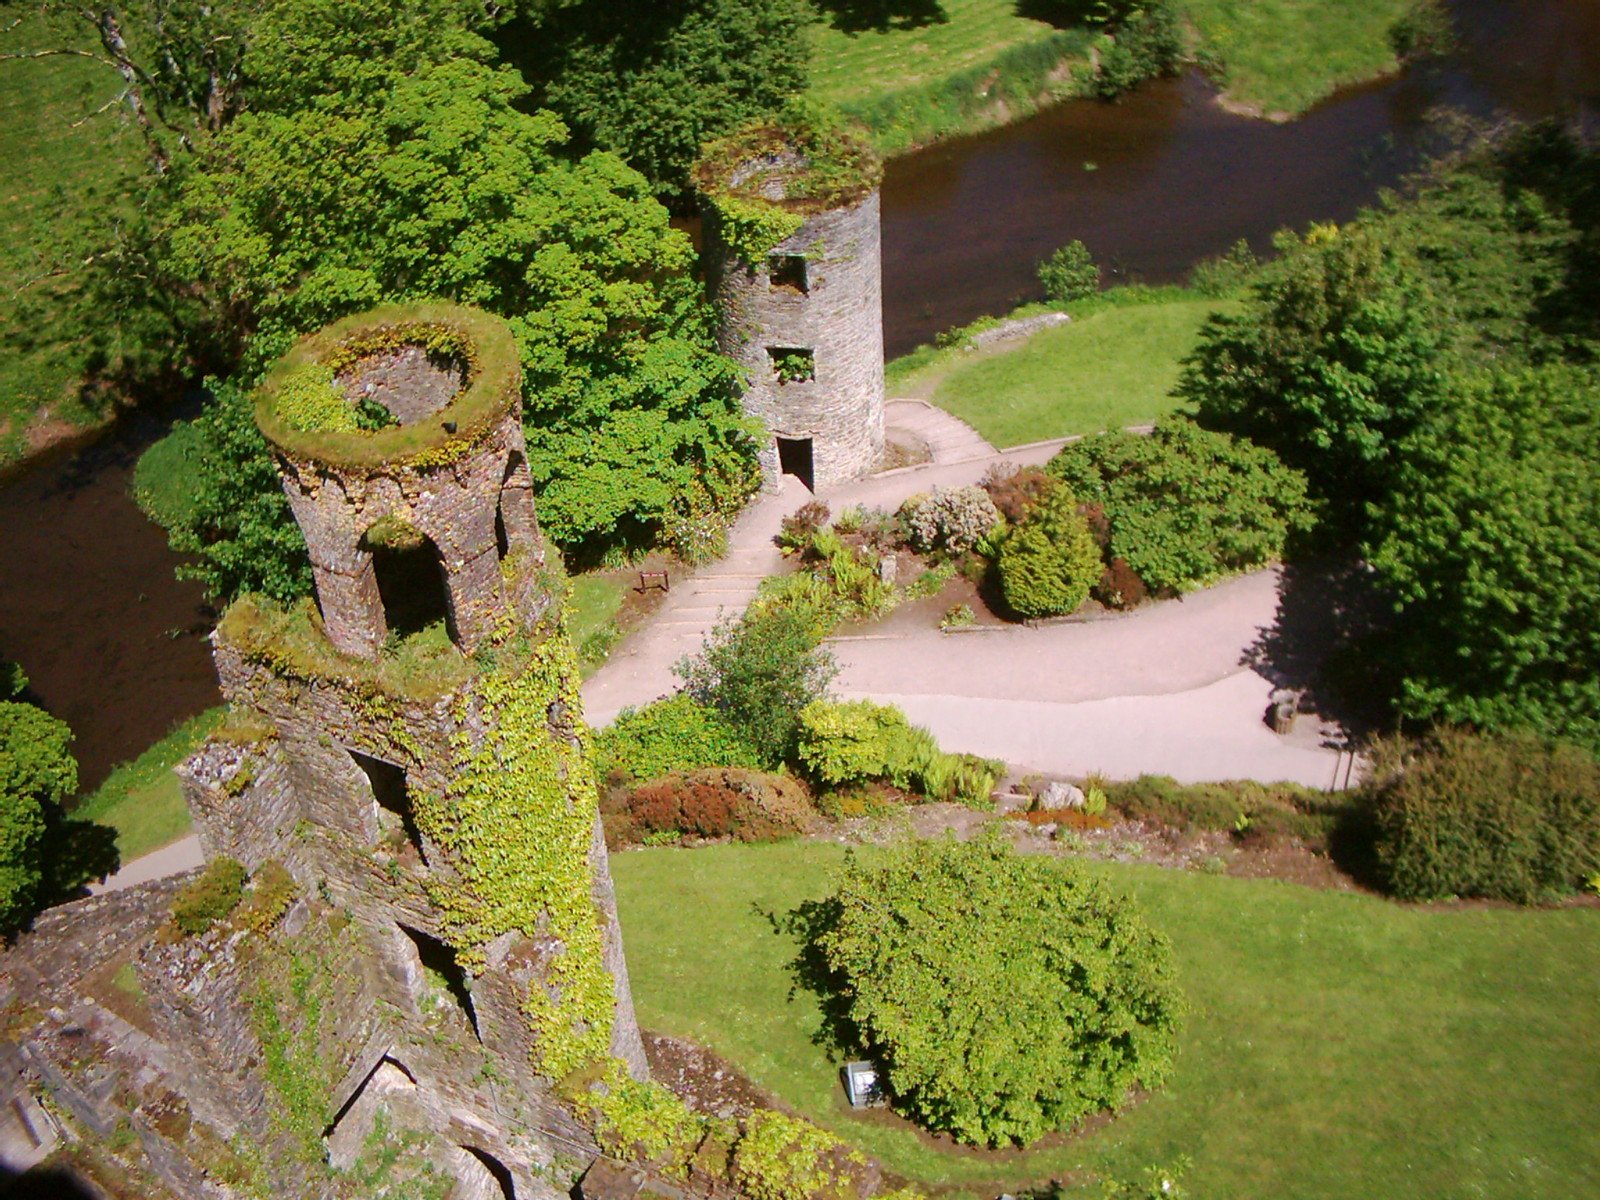 an aerial po of a castle like structure near a body of water